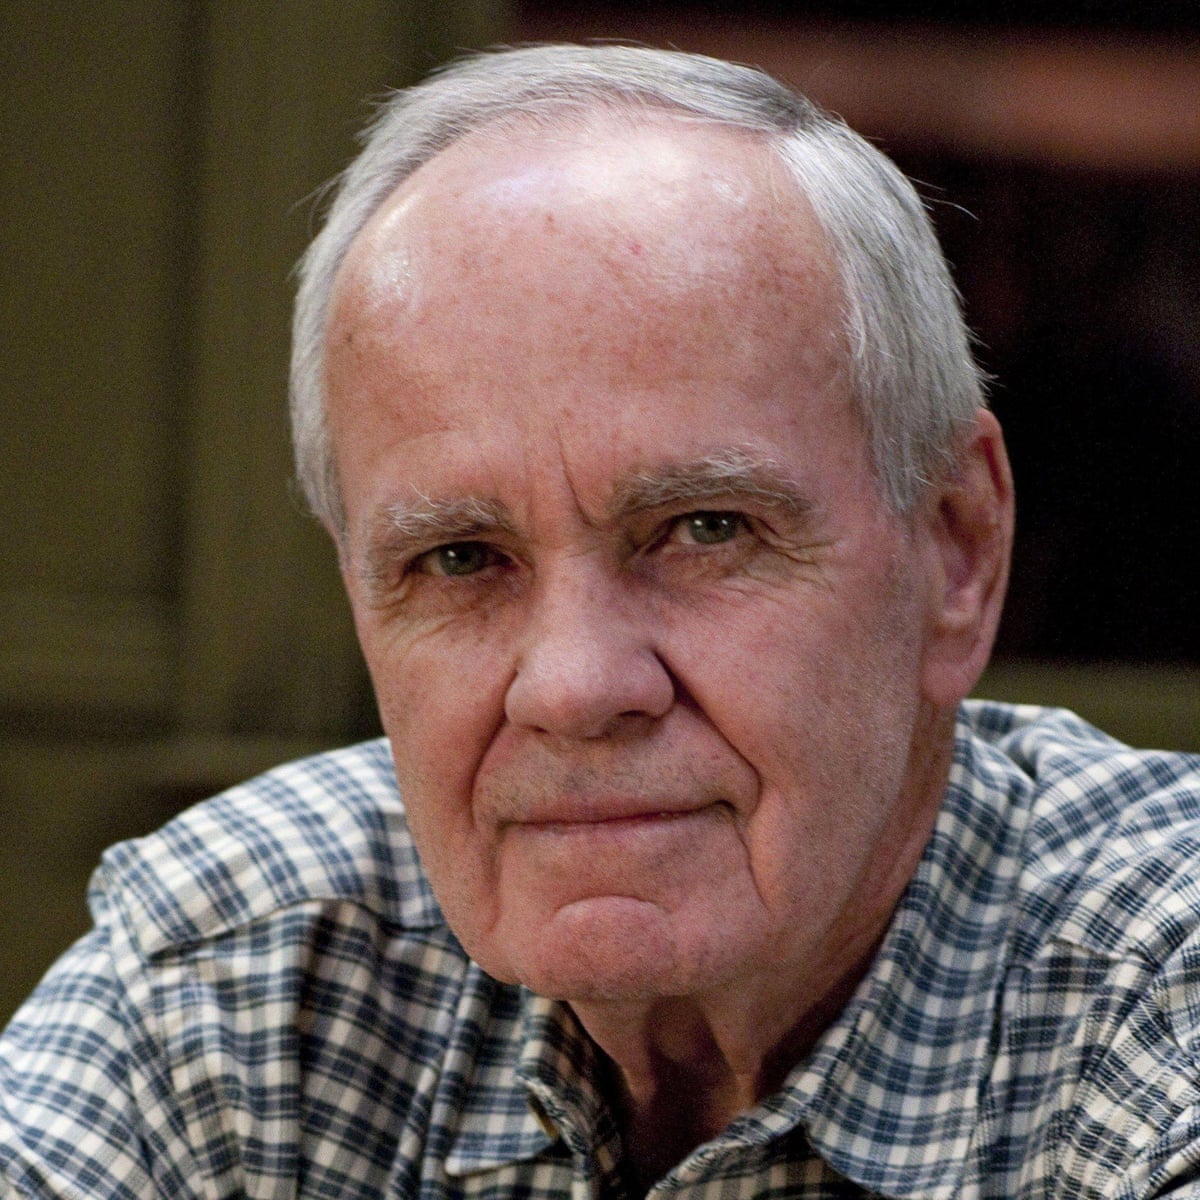 Cormac mccarthy, celebrated us novelist, dies aged 89 | cormac mccarthy |  the guardian